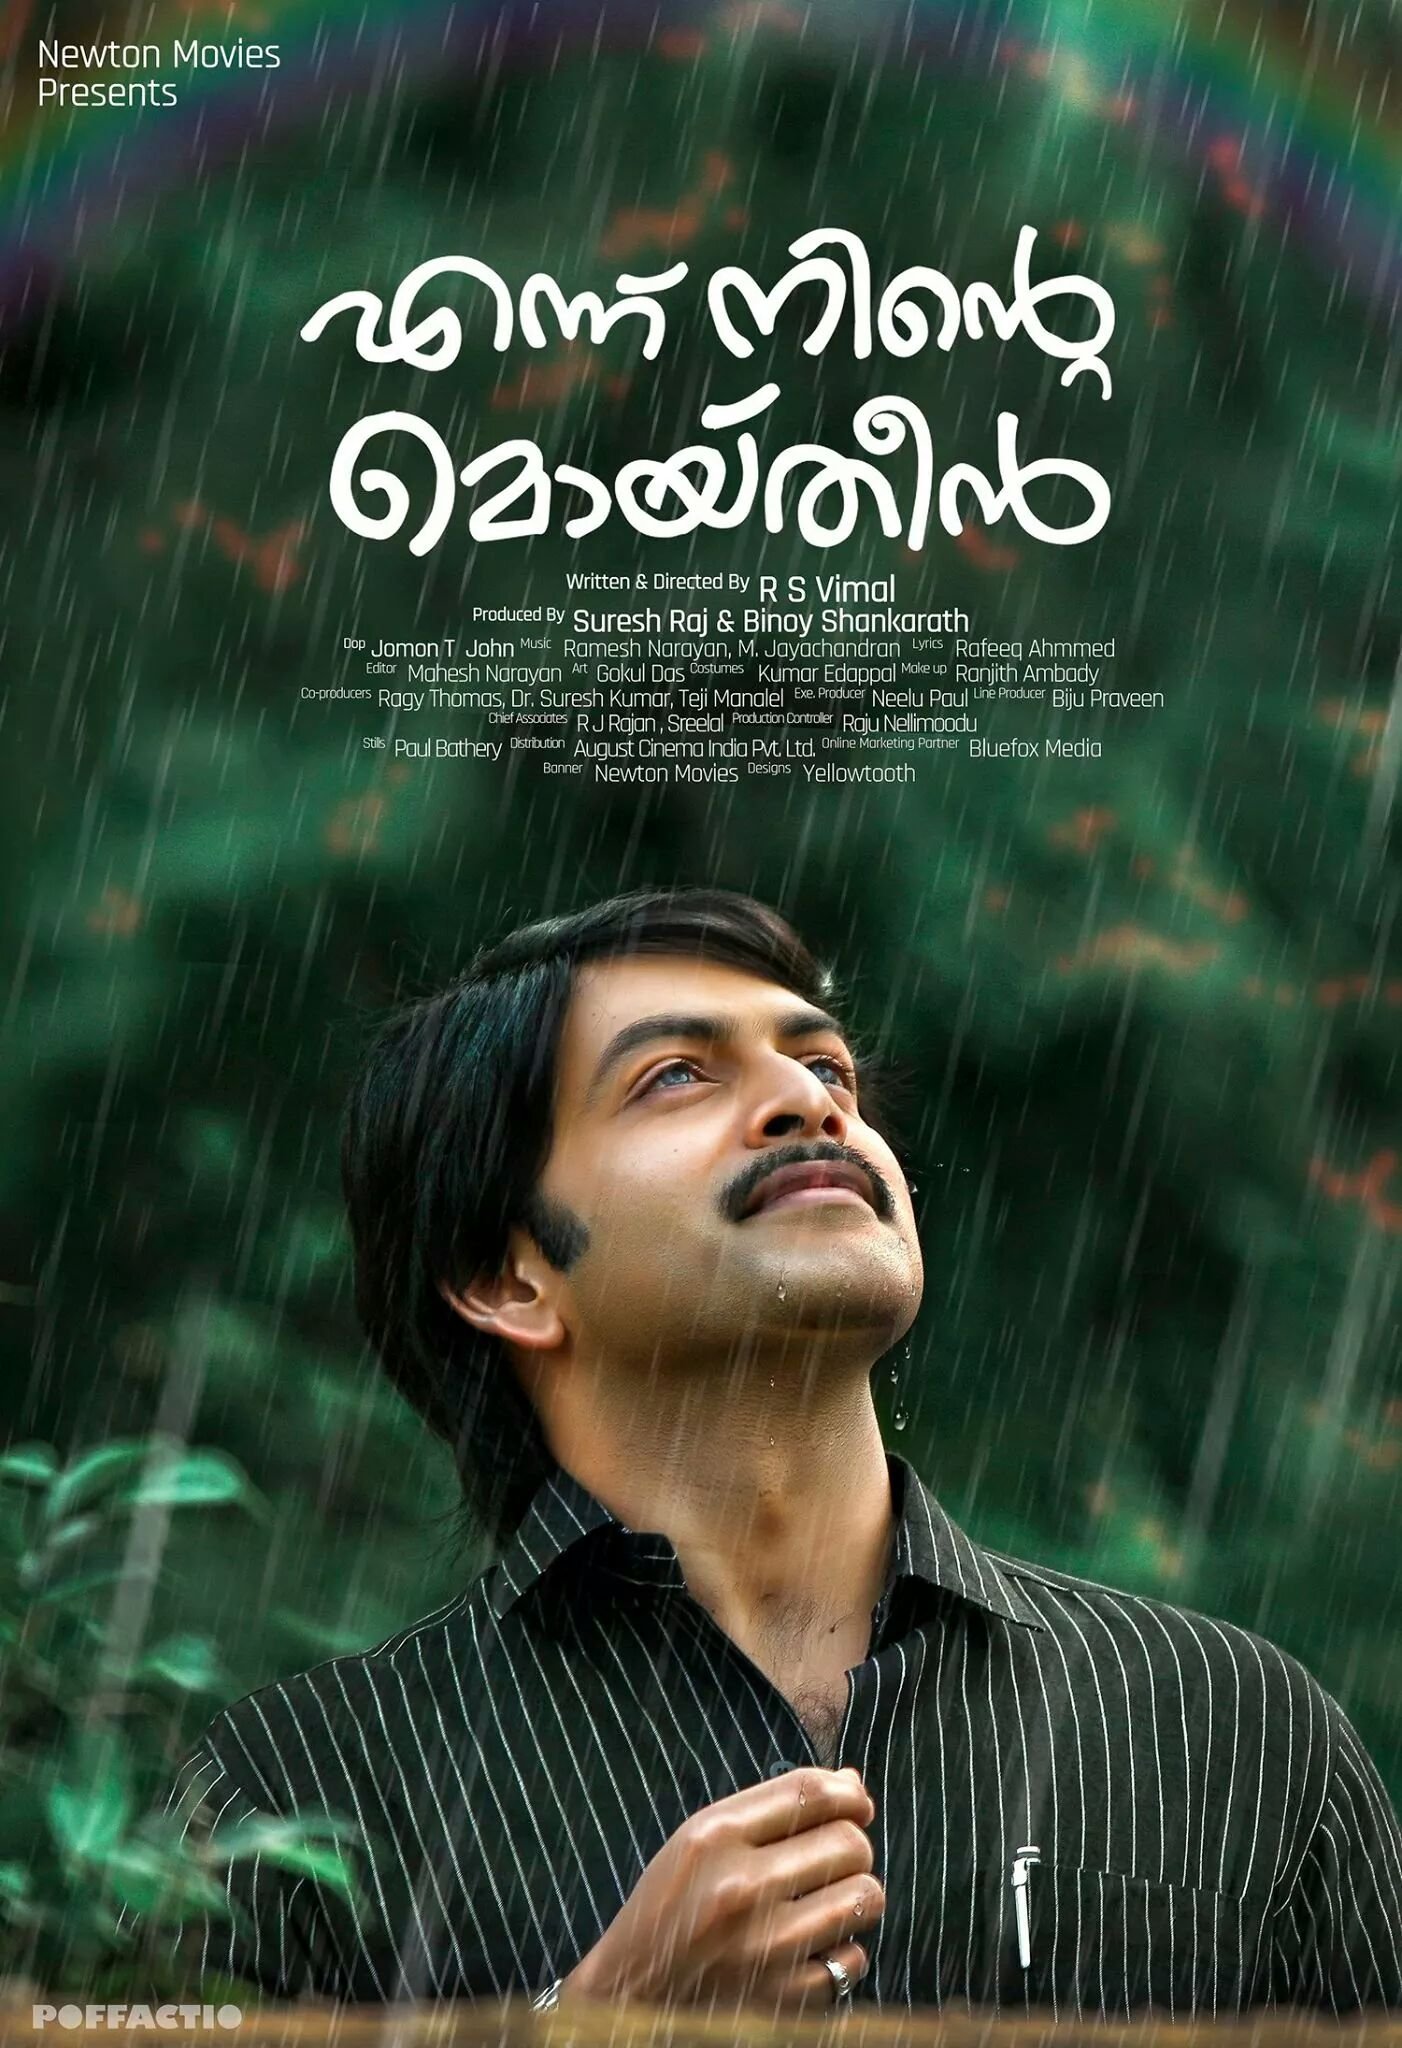 Malayalam poster of the movie Ennu Ninte Moideen